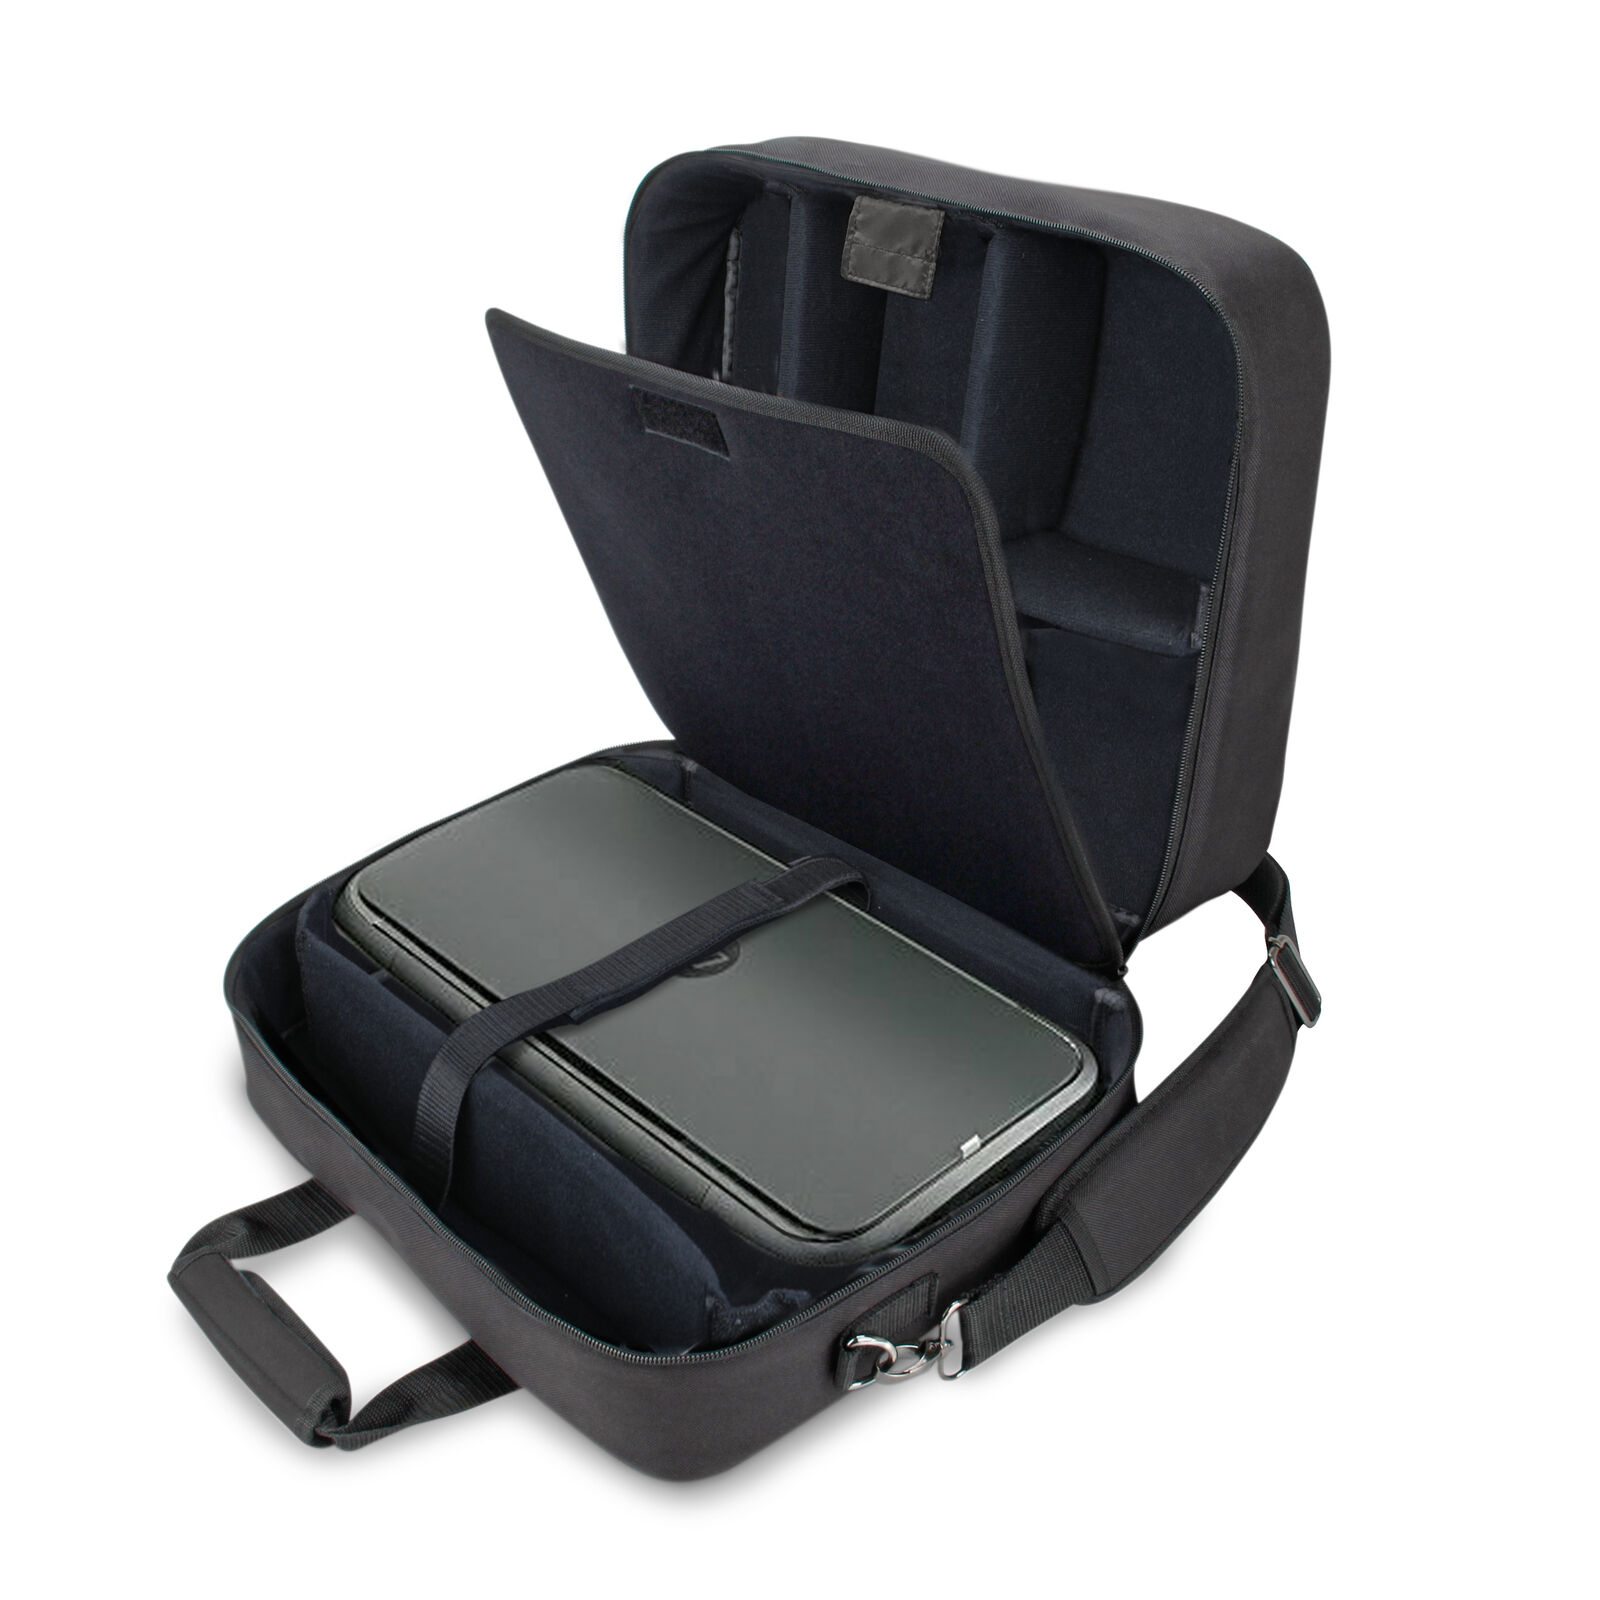 Portable Printer Case Compatible with HP Officejet 250 All-in-One Printer